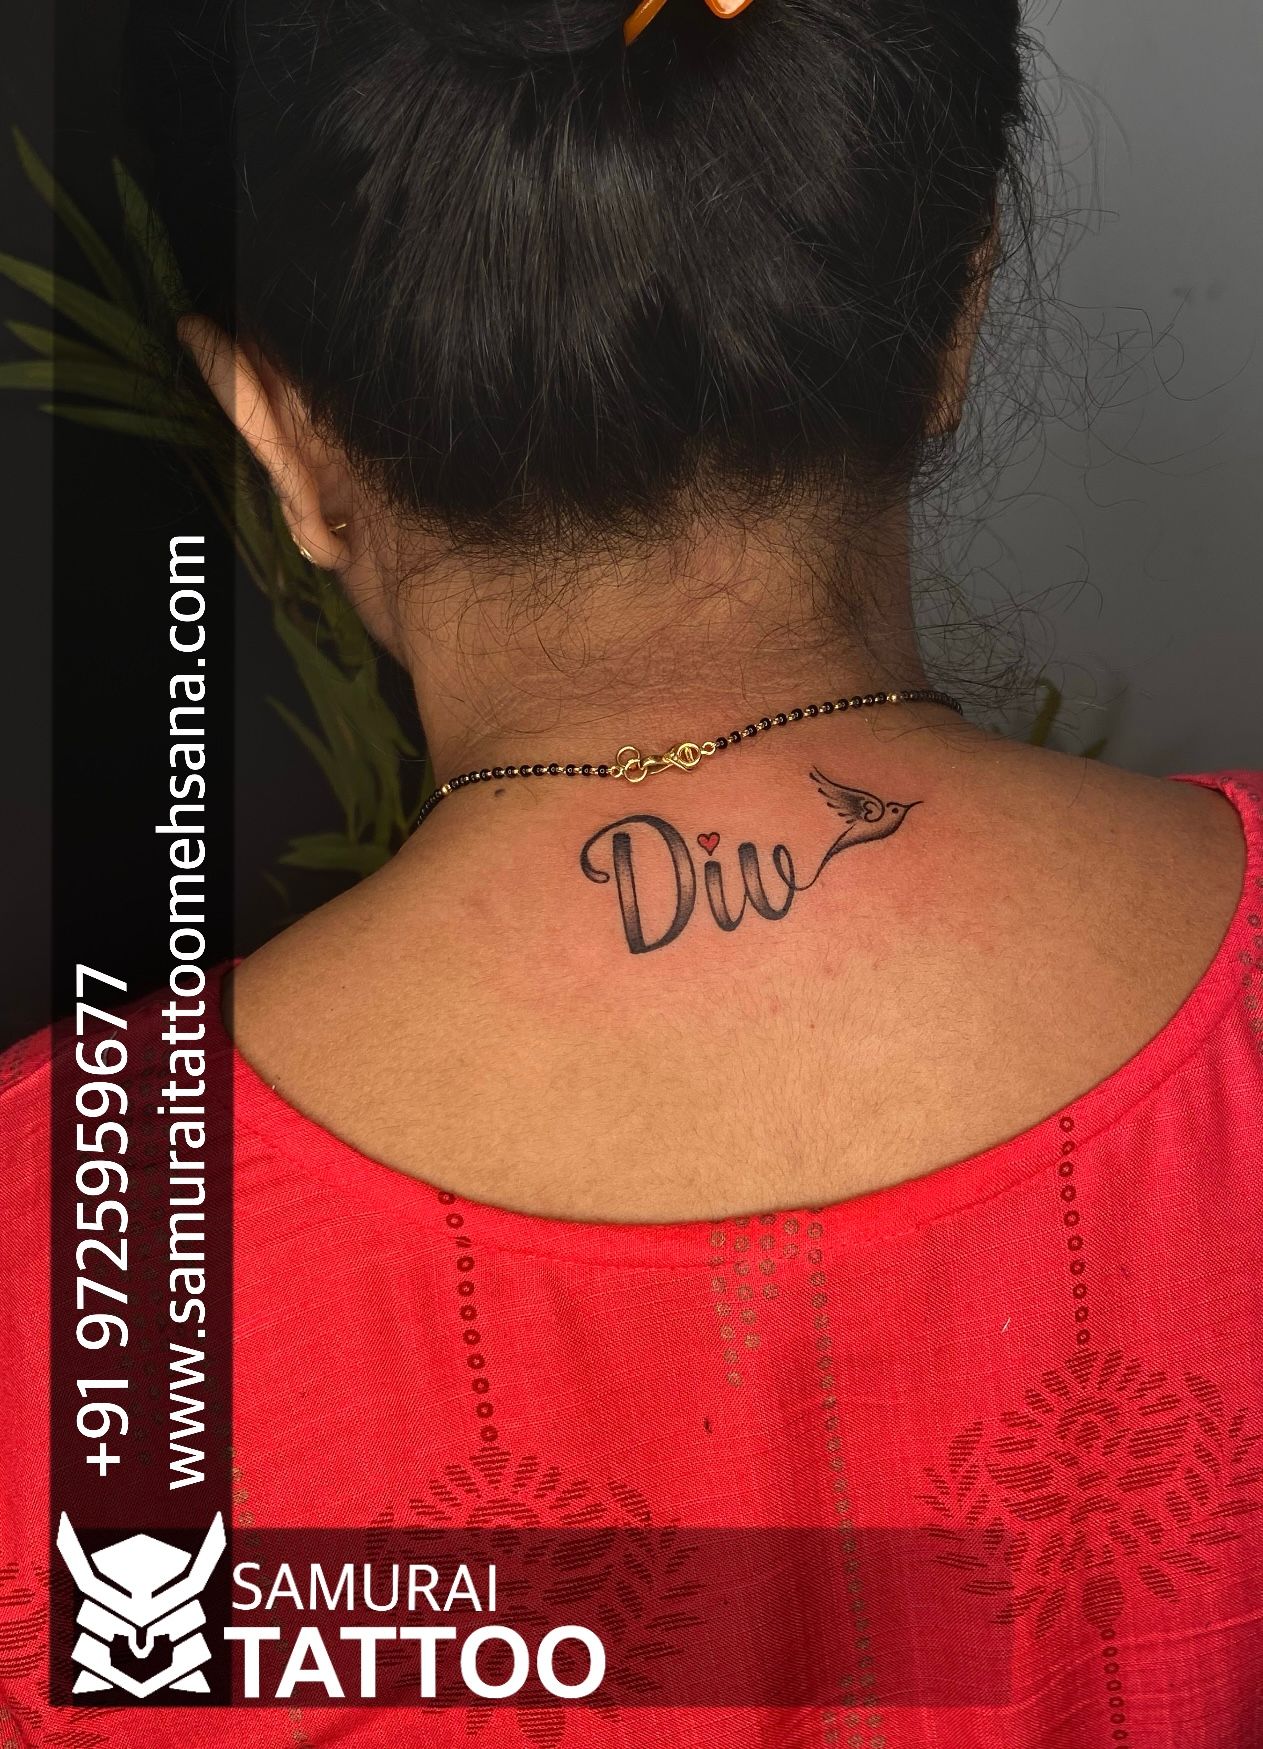 Tattoo uploaded by Vipul Chaudhary  div name tattoo Div tattoo Div name  tattoo ideas  Tattoodo